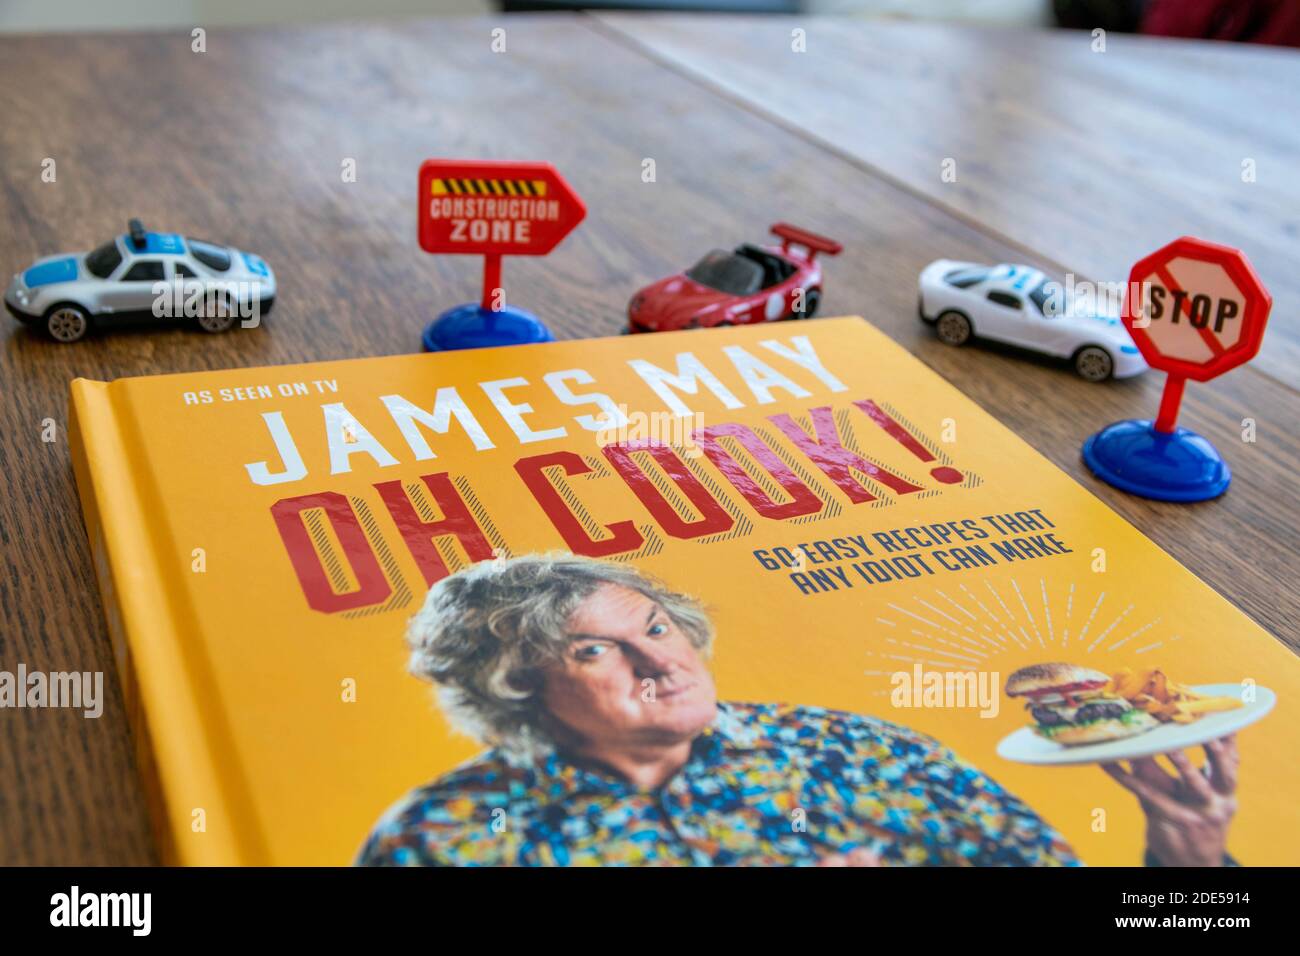 Durham, UK - 17 Nov 2020: James May Oh Cook cookery book. Top Gear car presenter come amateur chef, James learns on the go on the TV show Oh Cook, suc Stock Photo